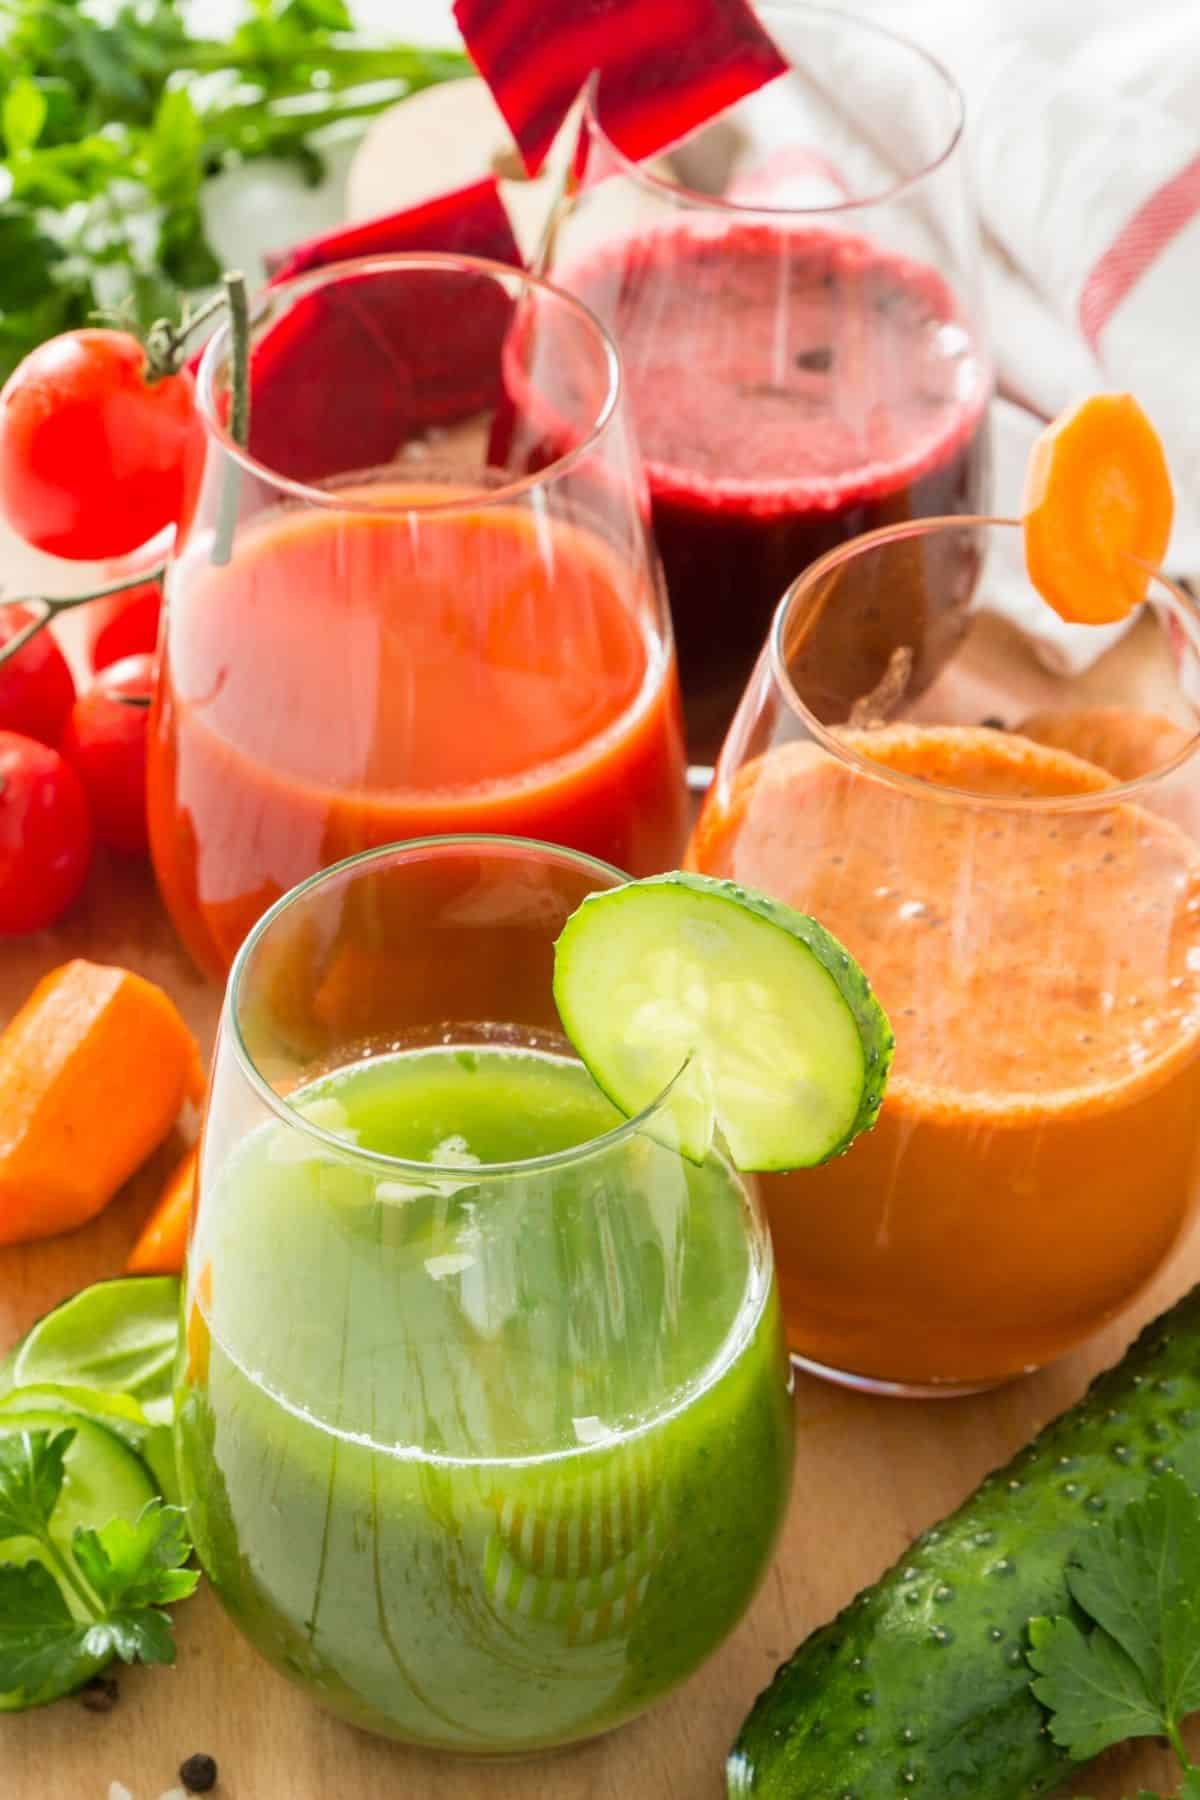 https://www.cleaneatingkitchen.com/wp-content/uploads/2021/08/fresh-juices-on-a-table.jpg